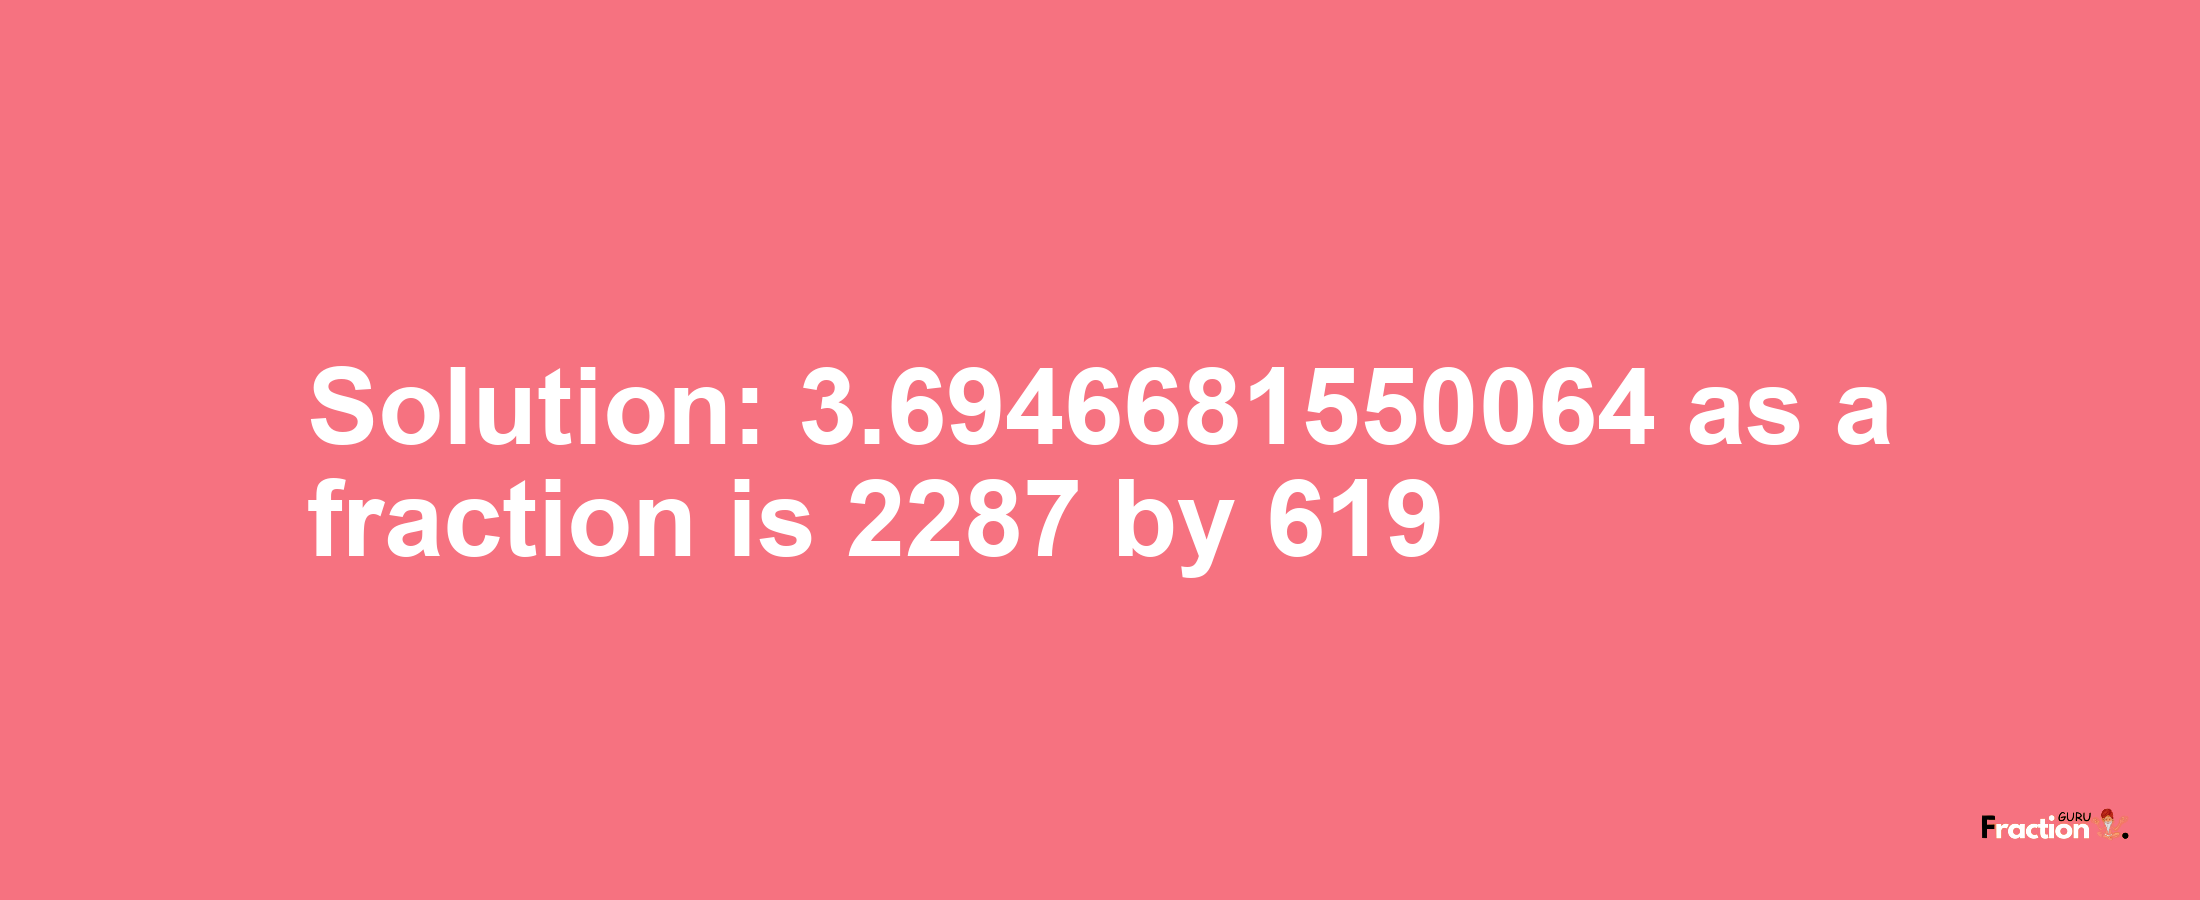 Solution:3.6946681550064 as a fraction is 2287/619